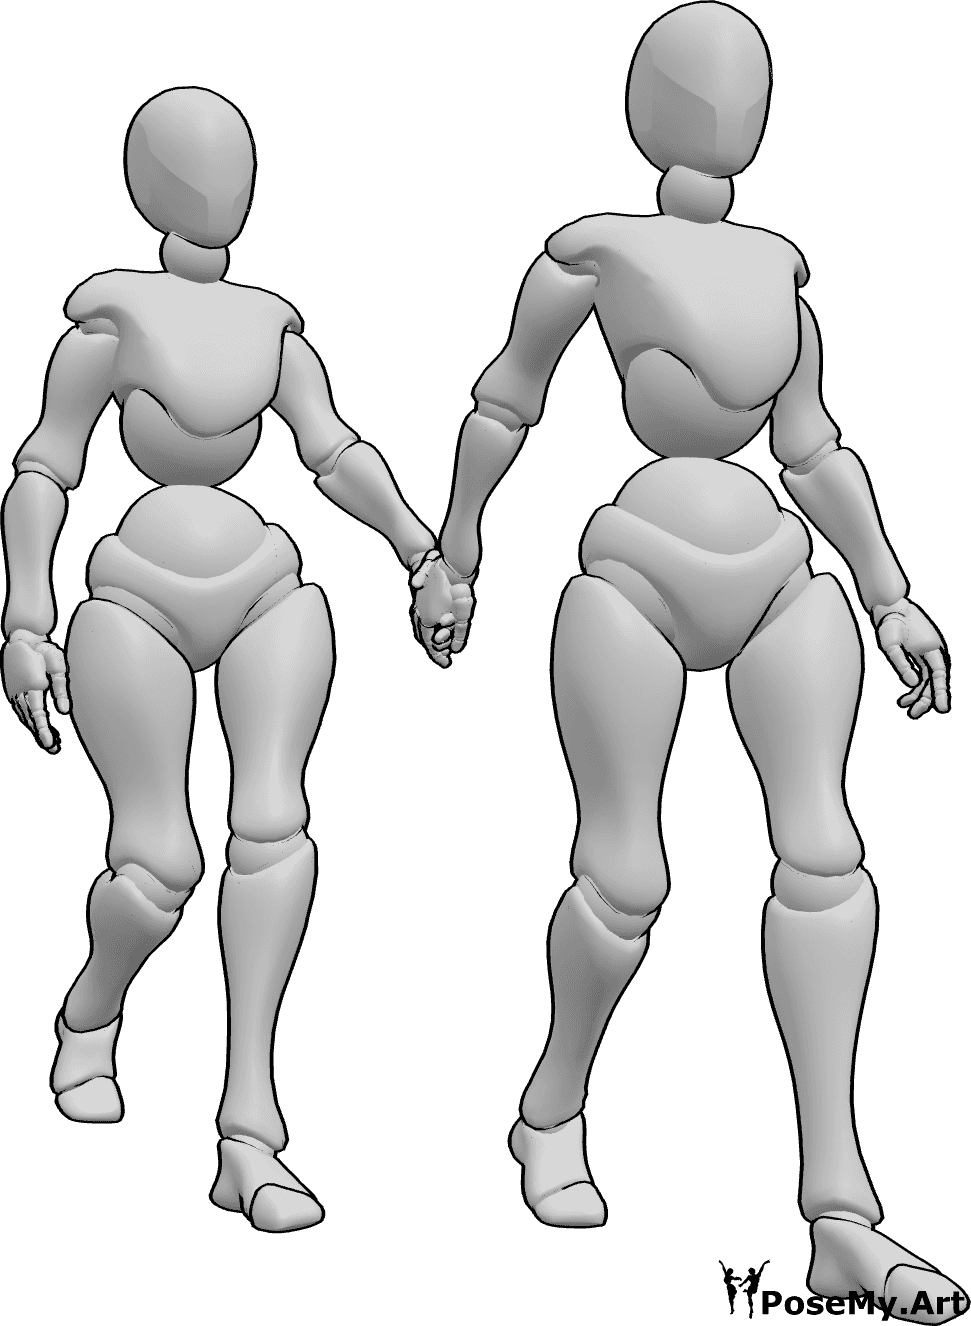 Pose Reference- Two females walking pose - Two females are walking hand in hand, one holding the other's hand and leading the way